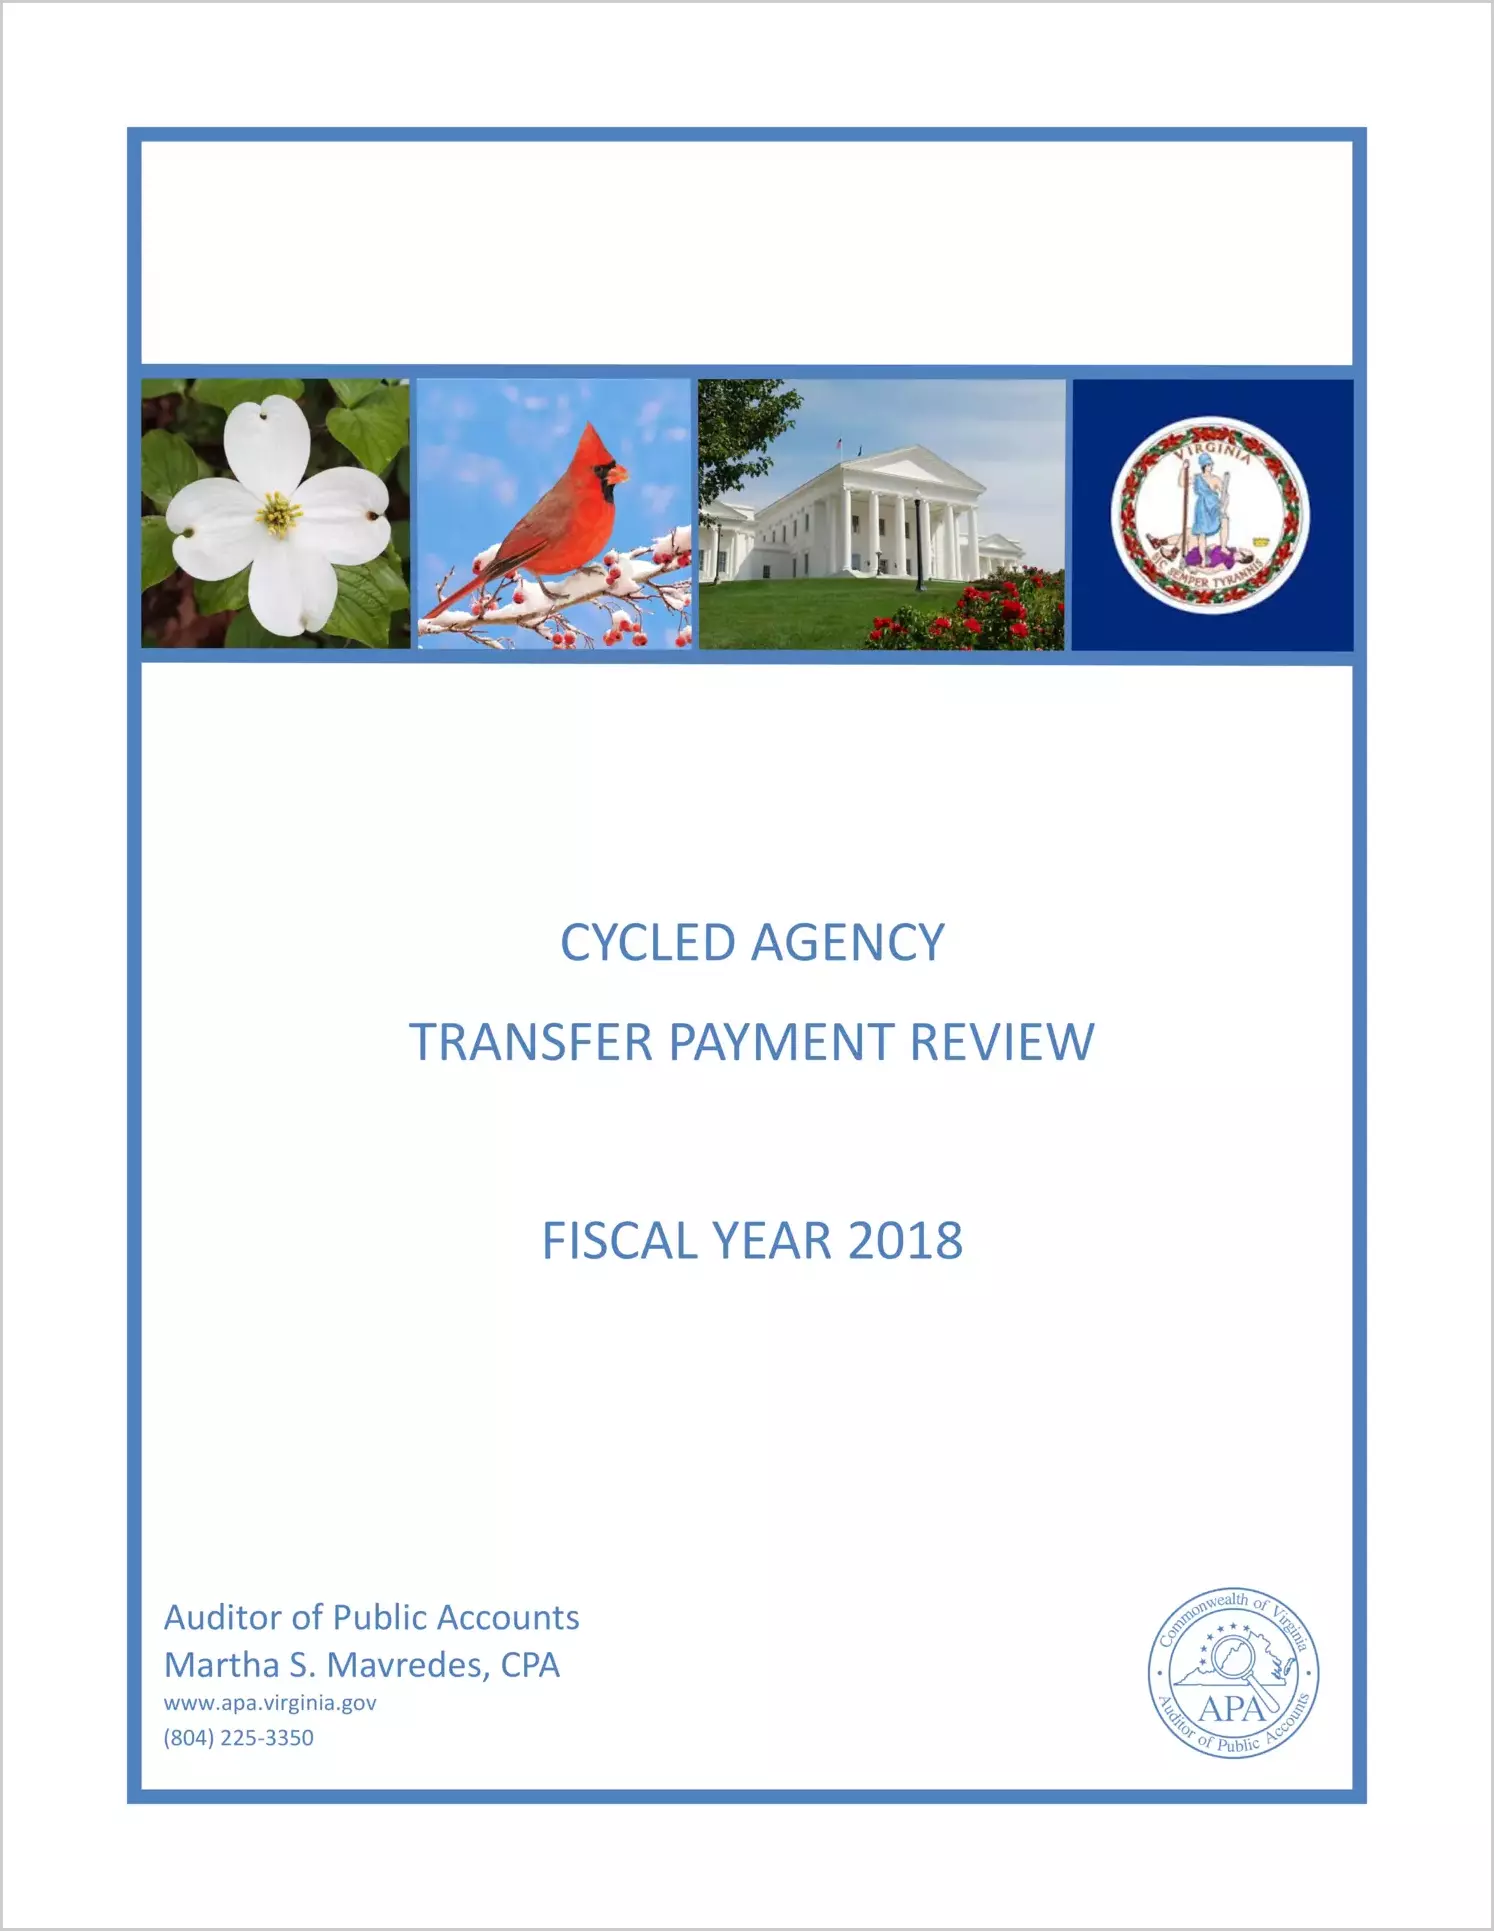 Cycled Agency Transfer Payment Review - Fiscal Year 2018